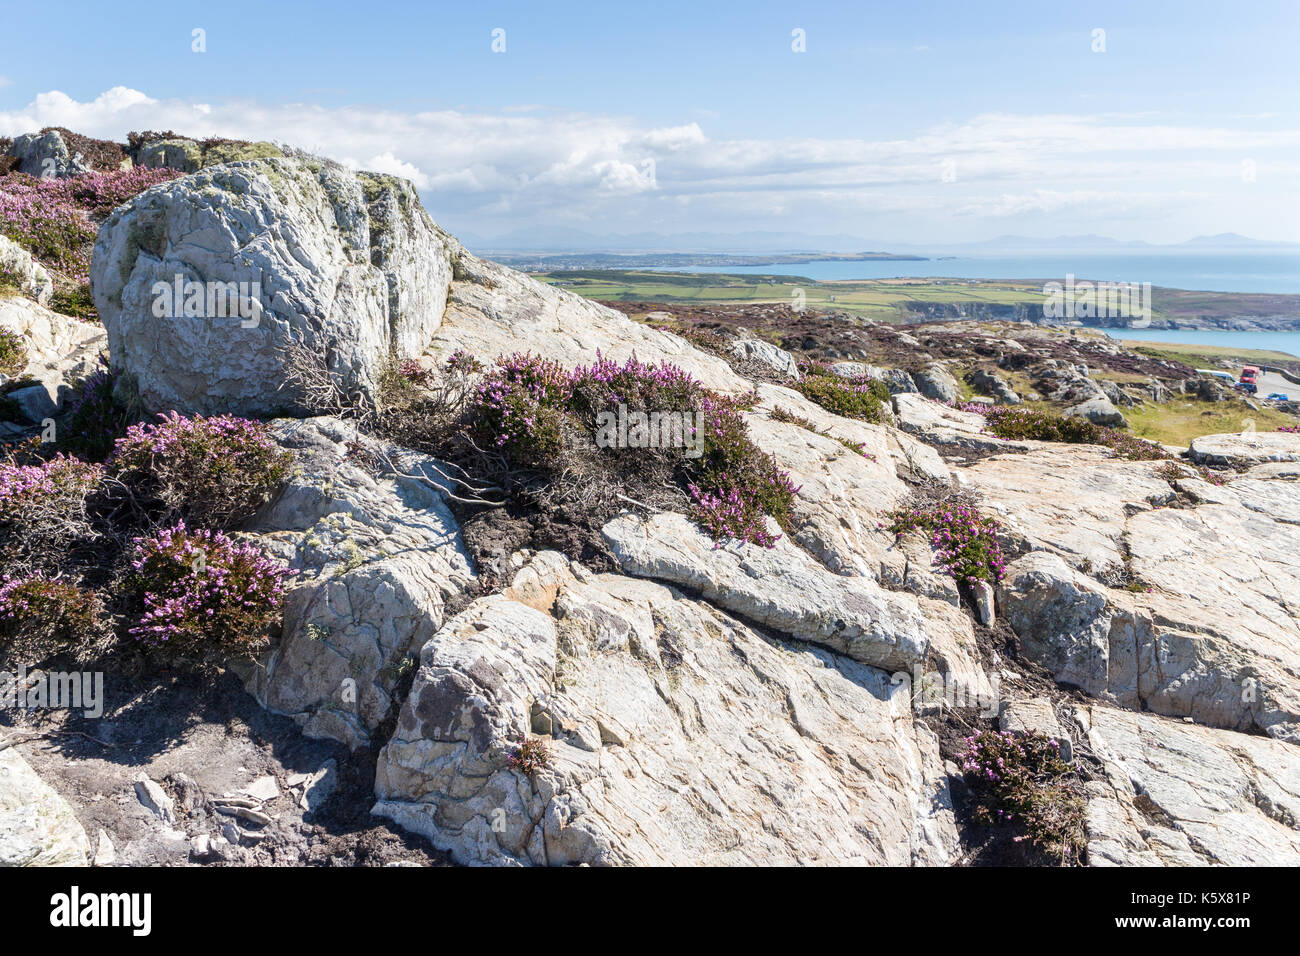 View over rocks and purple heather to the rugged coastline, Anglesey, North Wales, United Kingdom, UK Stock Photo